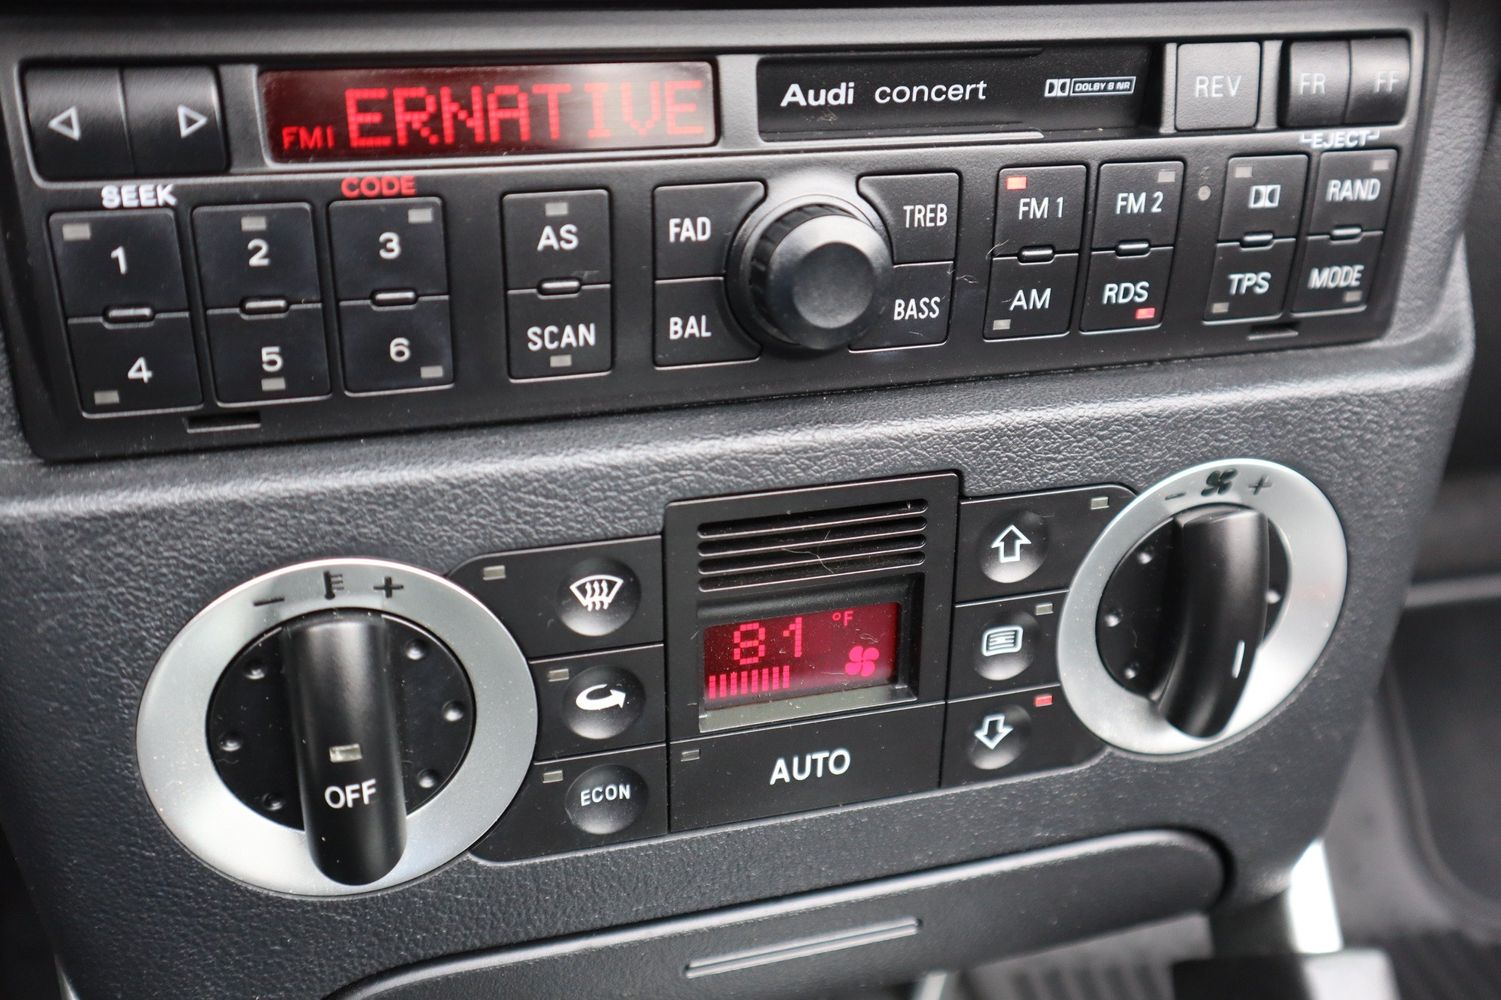 How To: Fix Safe Mode On Audi TT Stereo / Radio 2001 